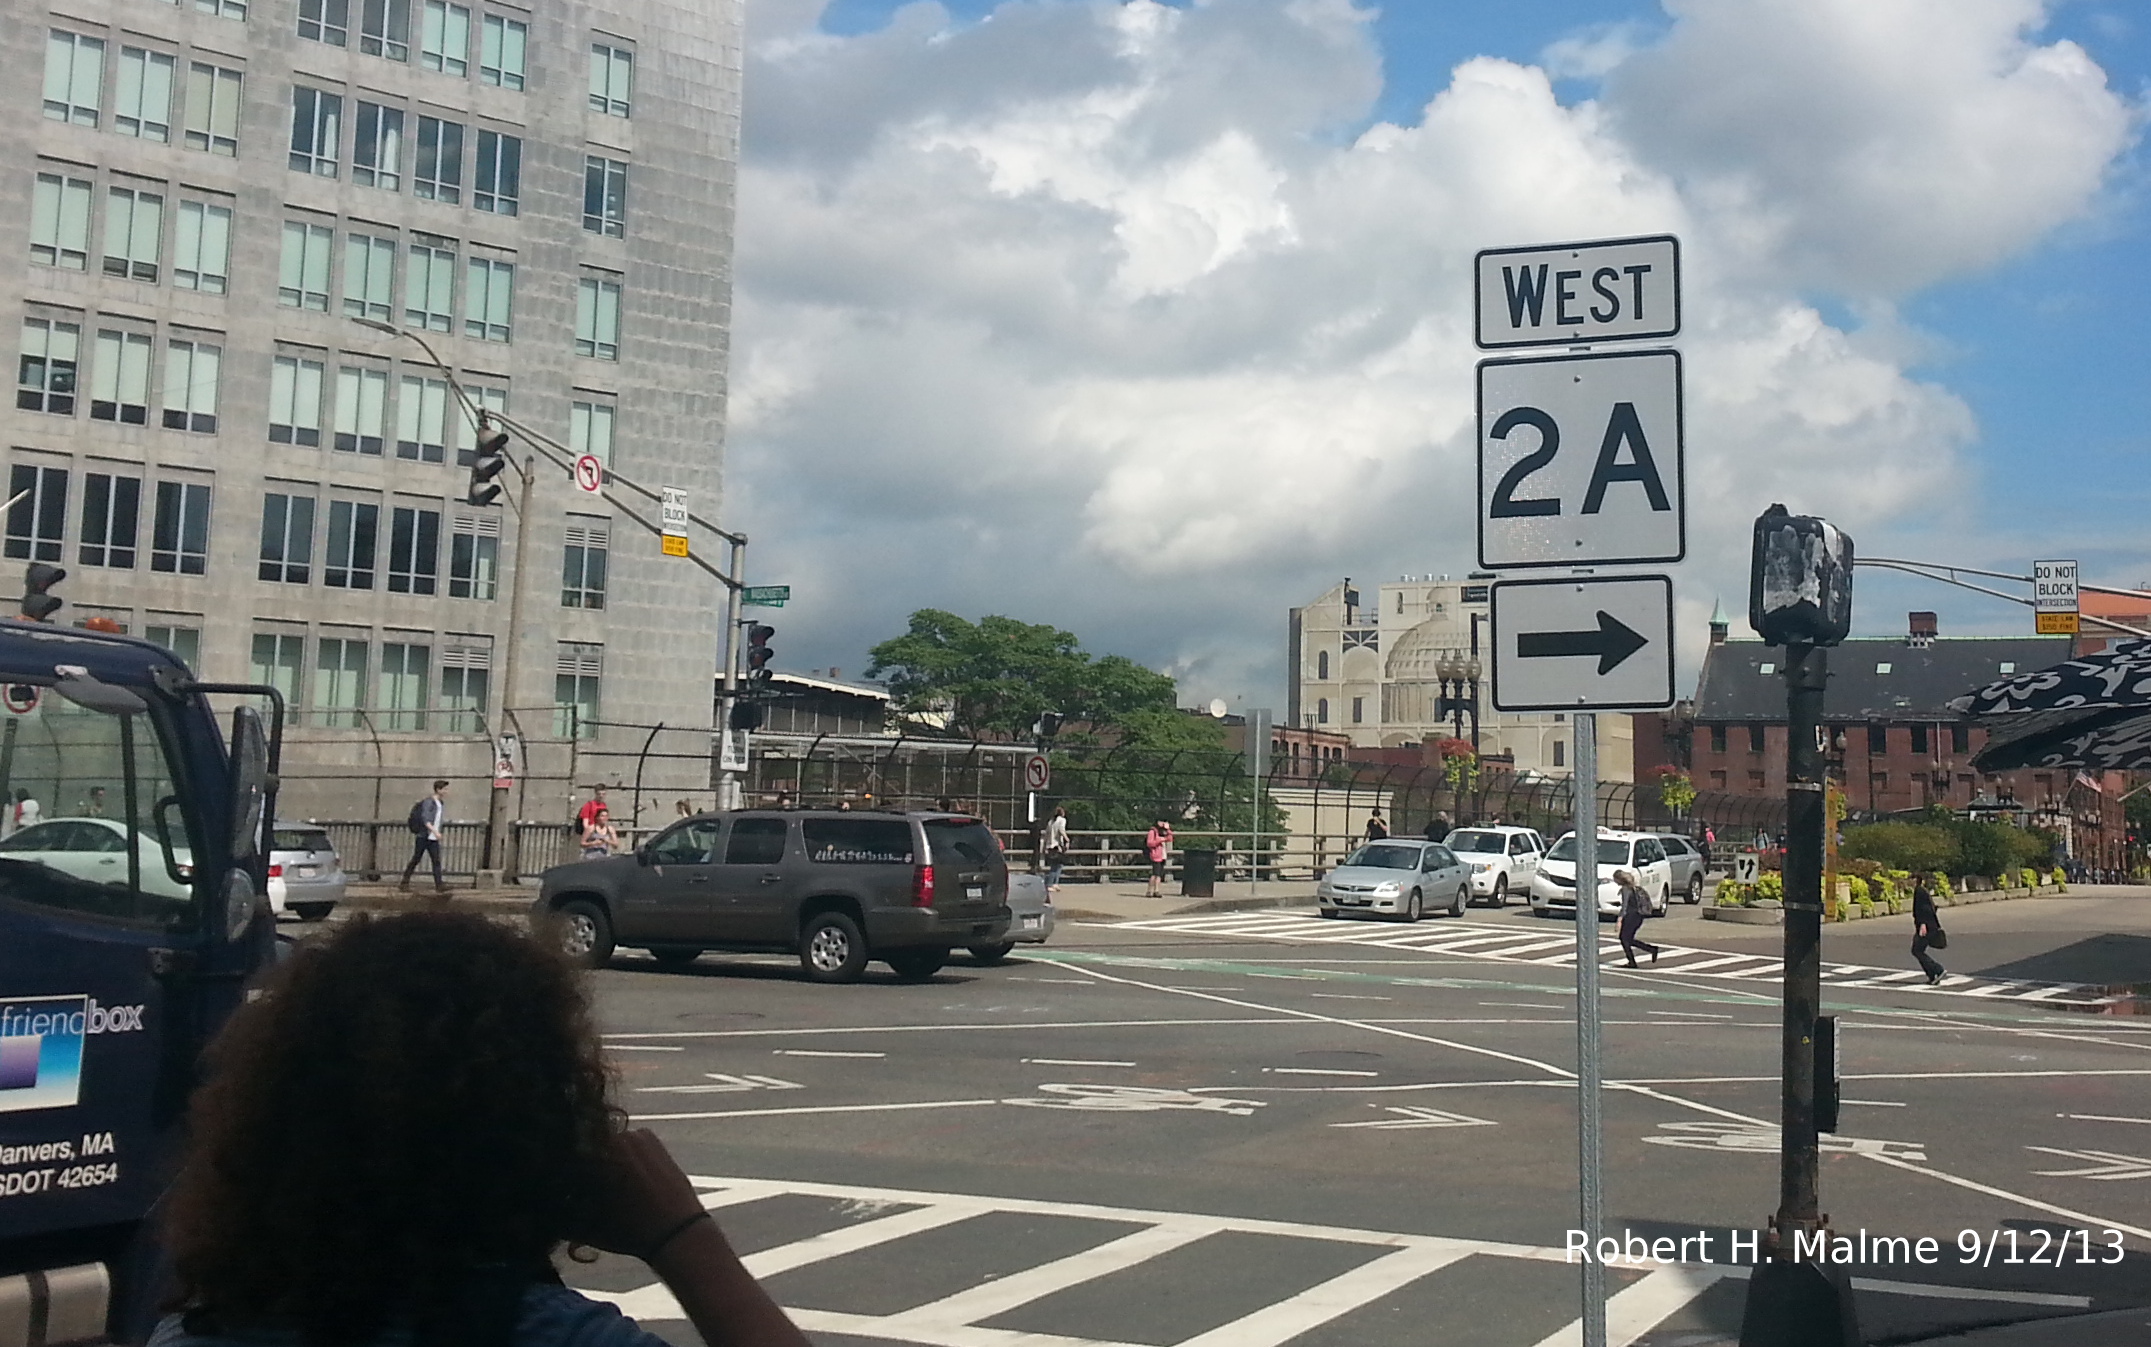 Photo of MA 2A West Guide Sign Approaching Mass Ave from Comm. Ave in Boston, 9/12/13